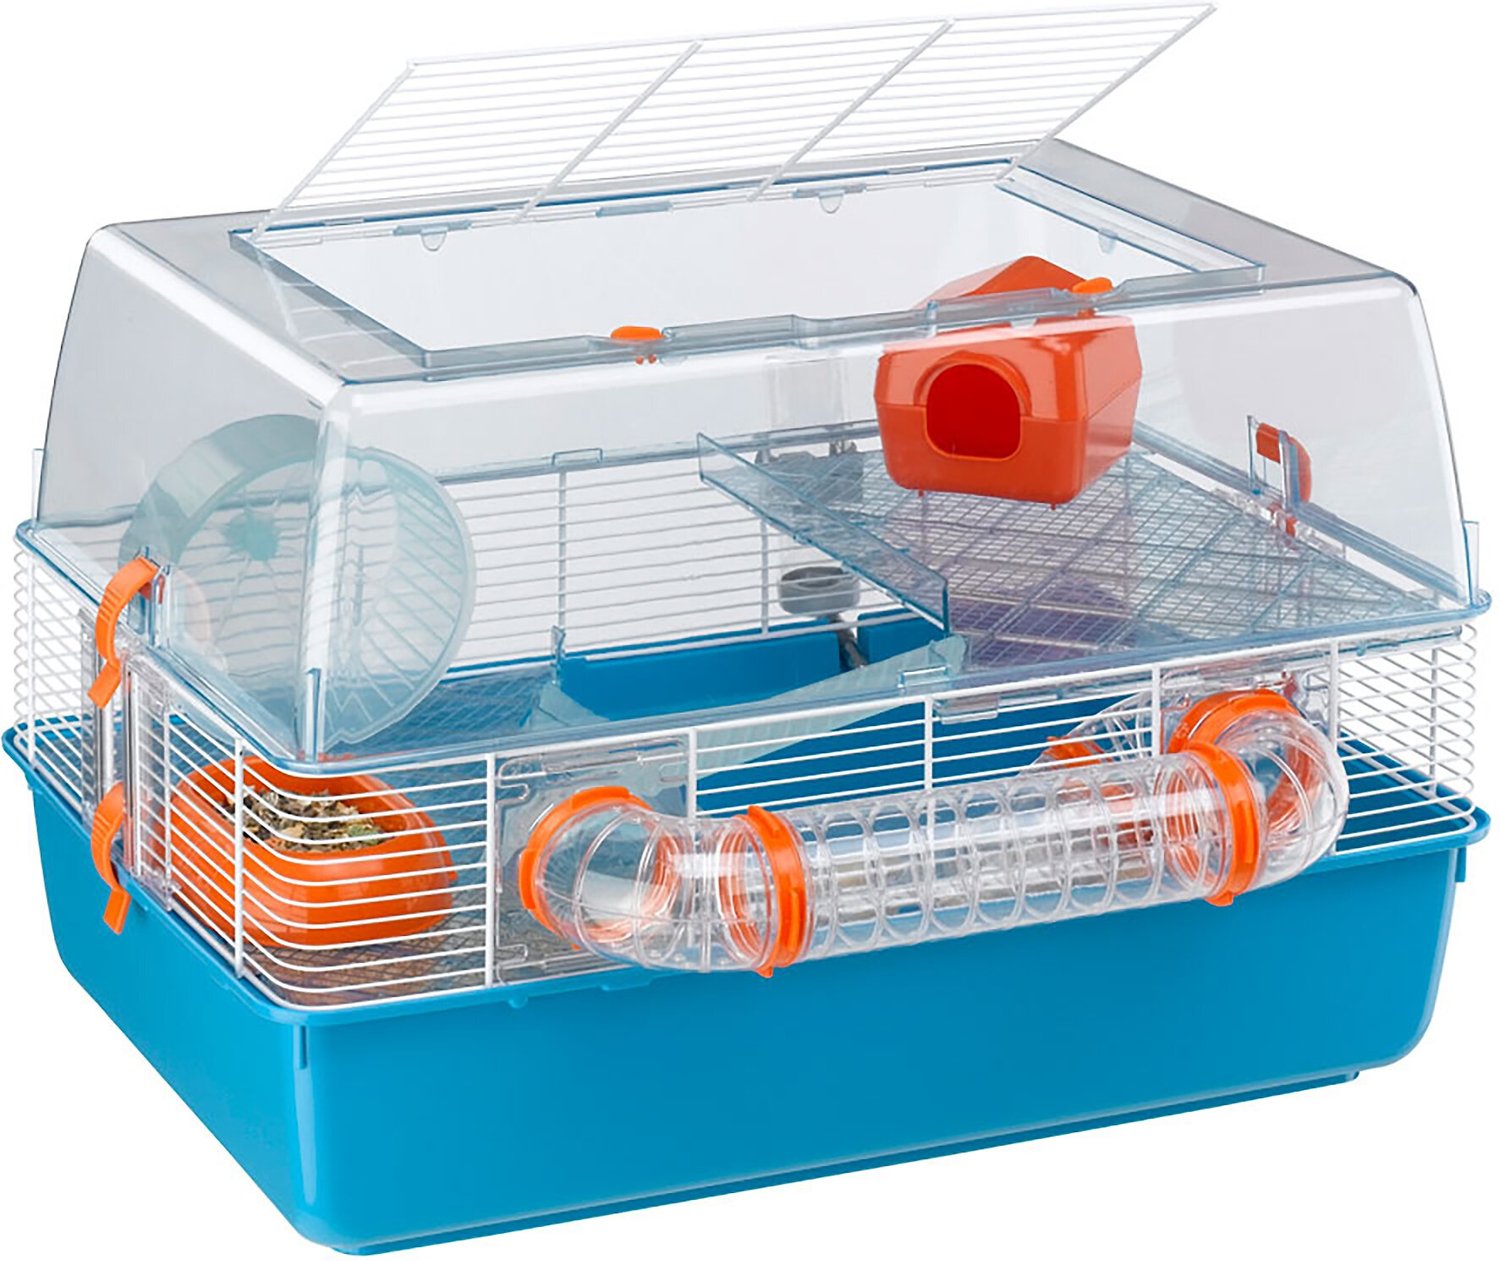 cage of hamster